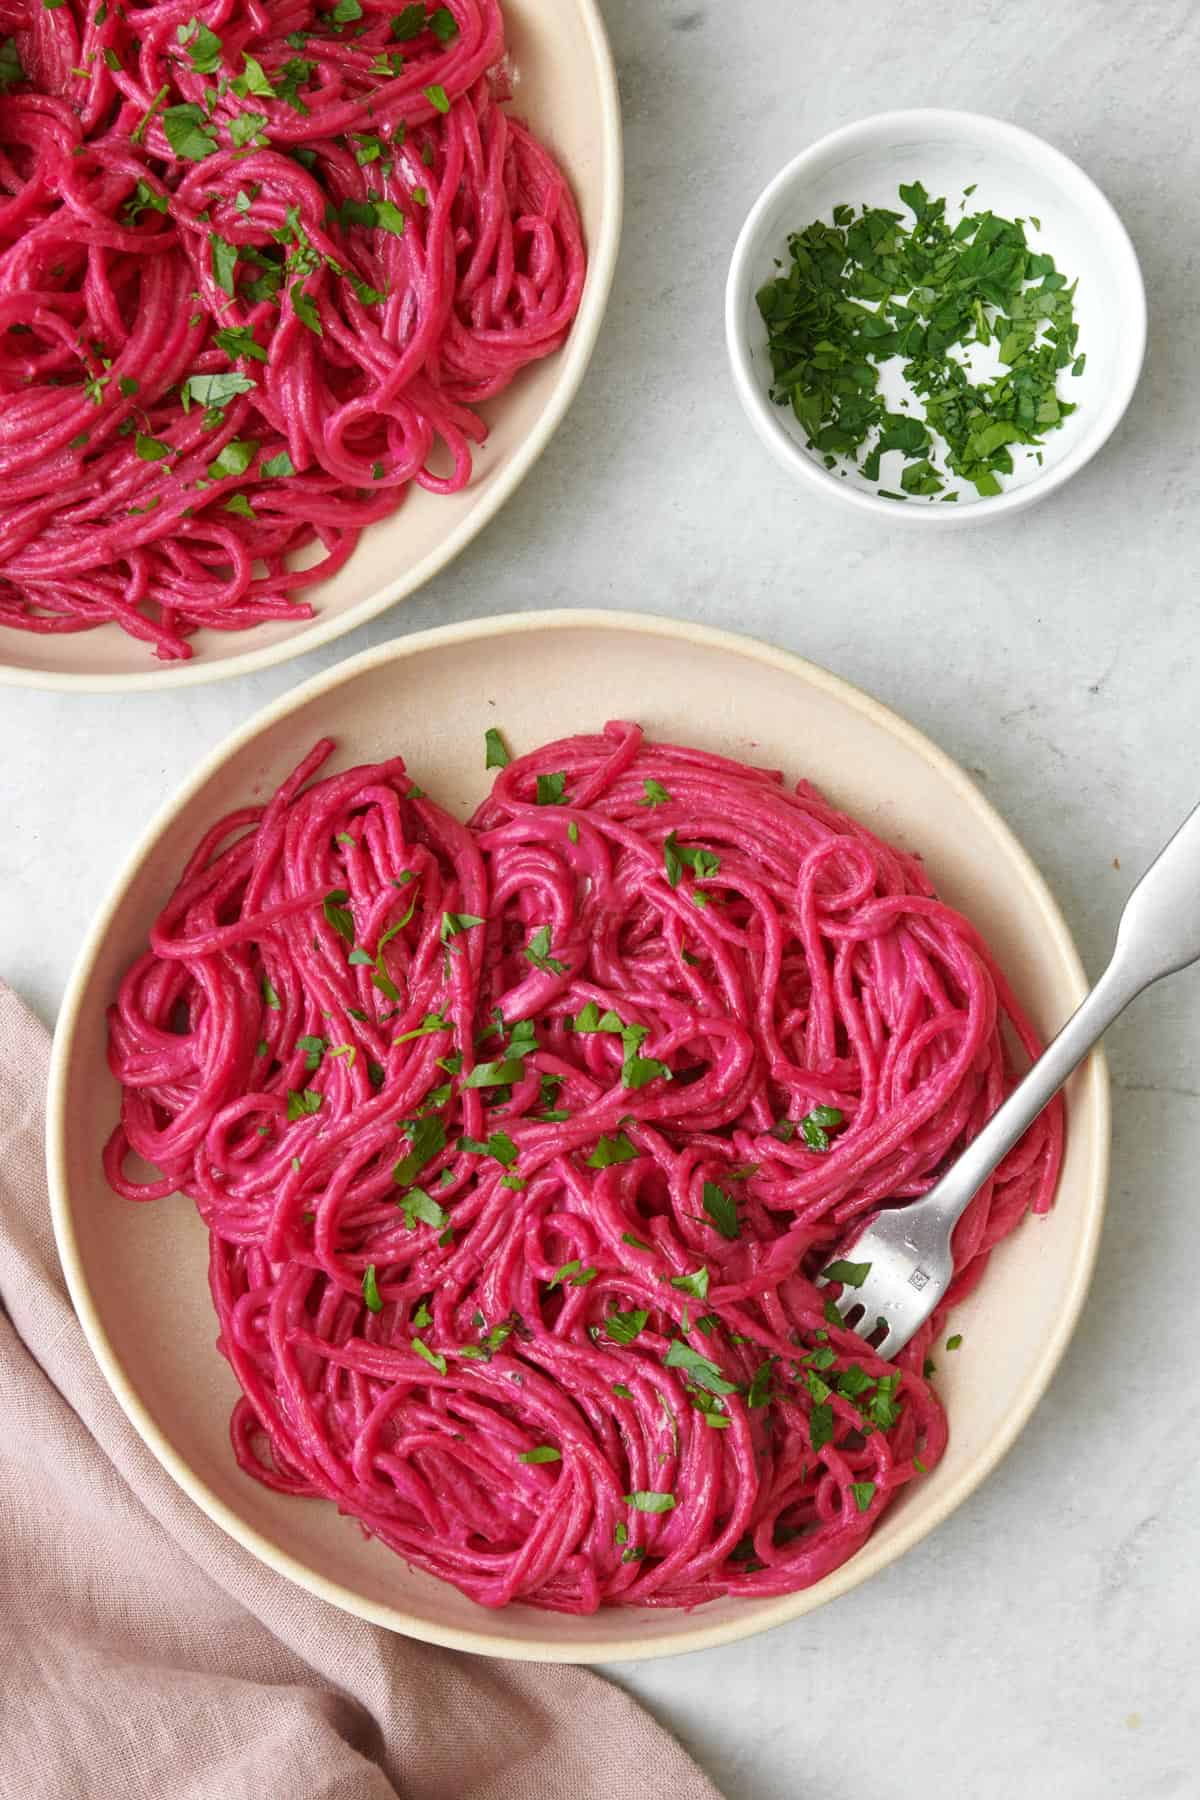 Serving of pink pasta made with roasted beets on a small plate.